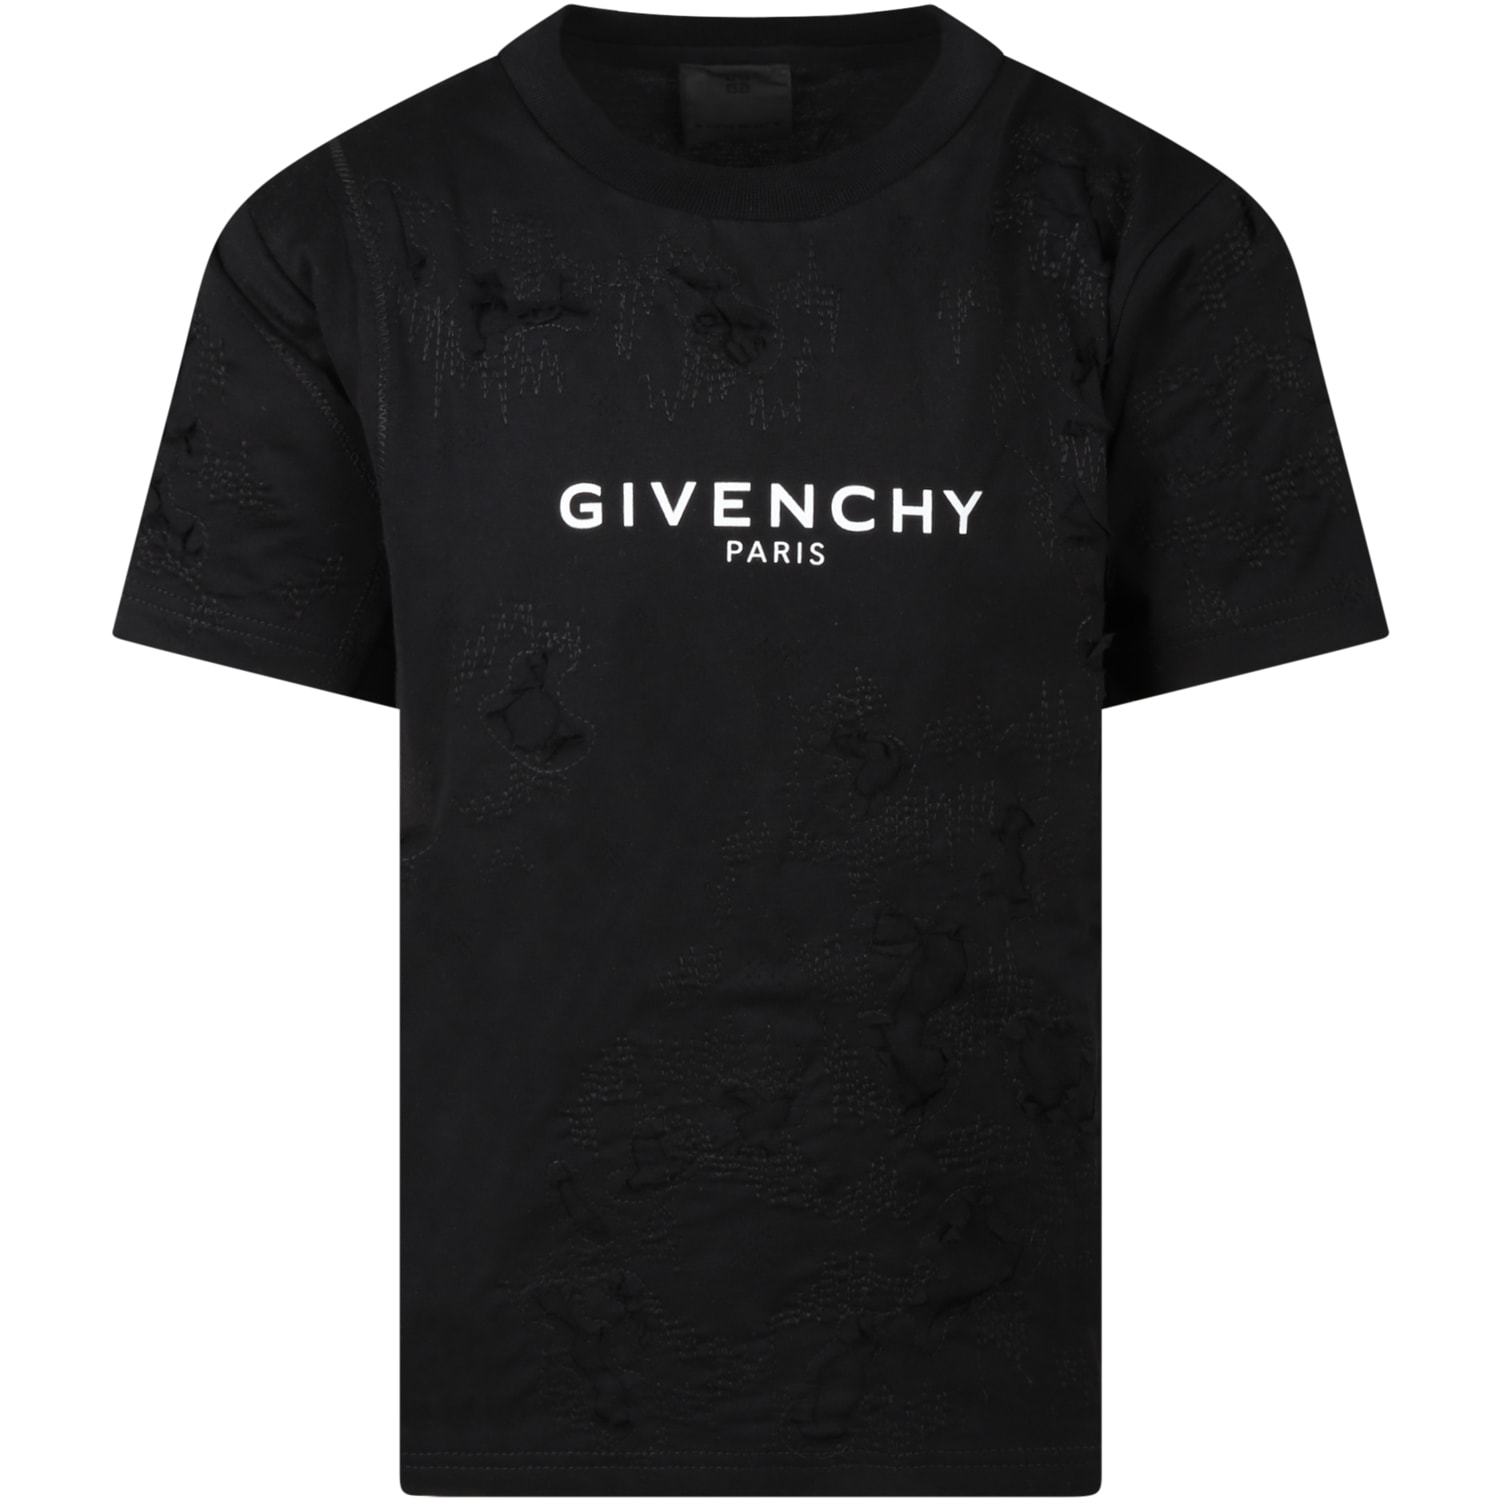 Givenchy Black T-shirt For Kids With Fake Rips And White Logo